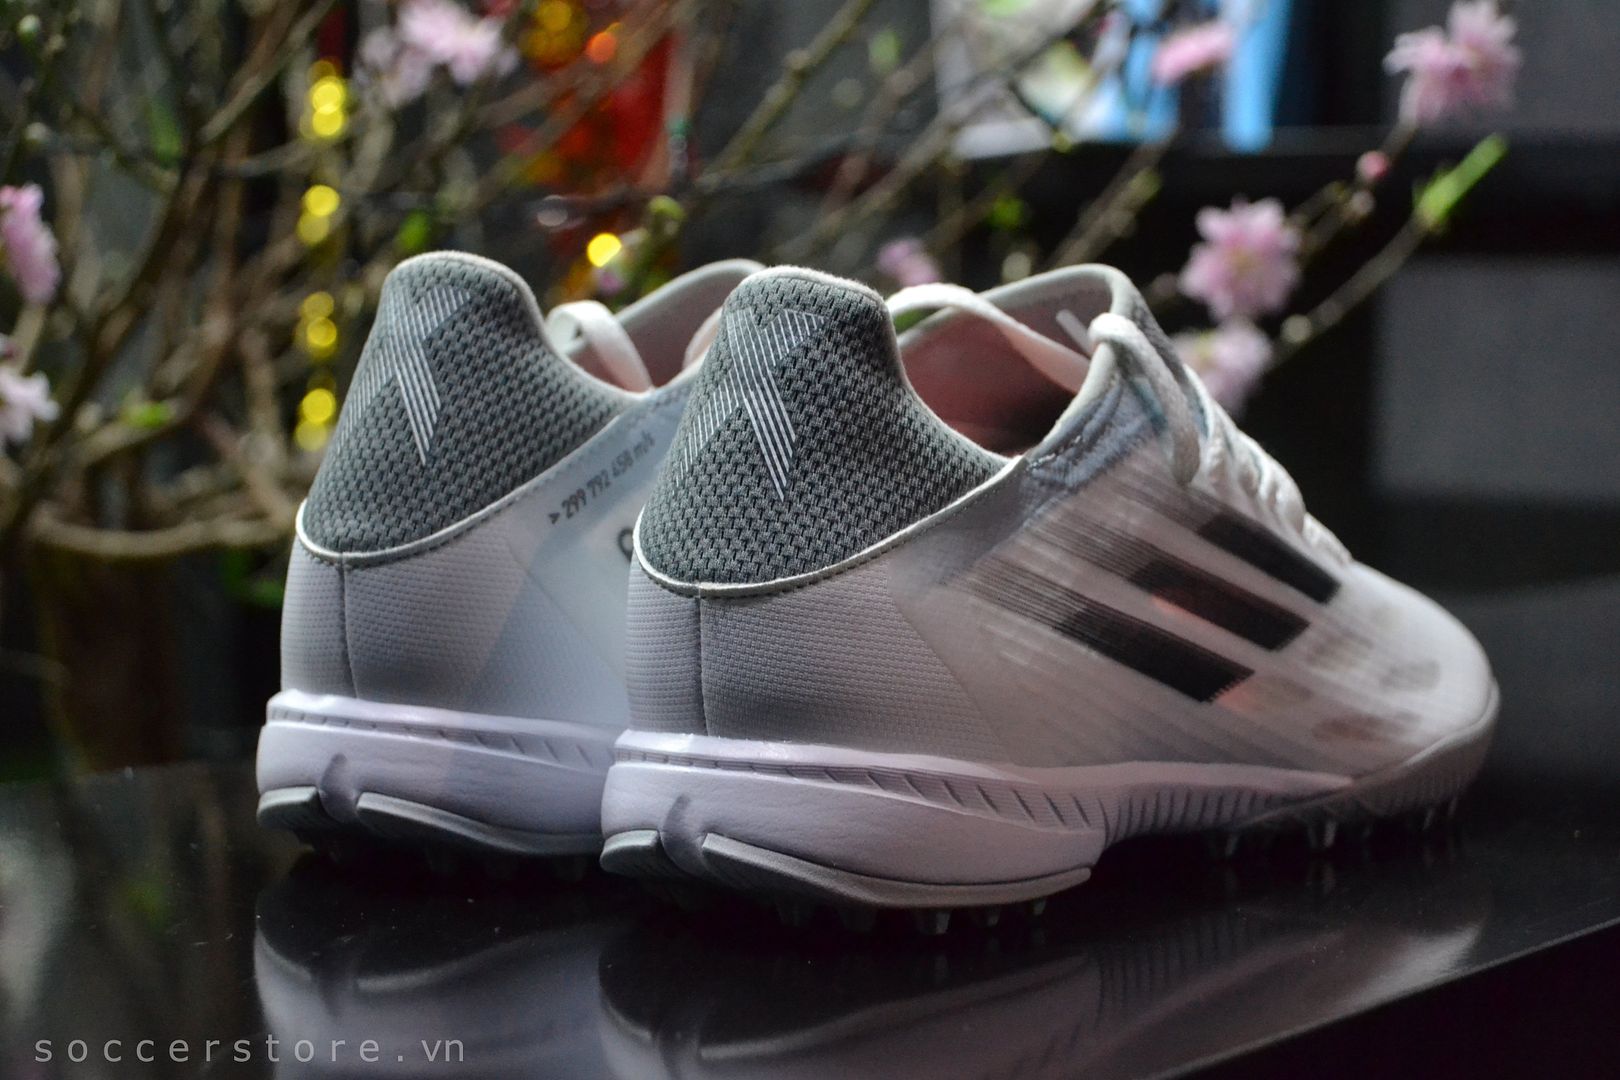 Adidas X SpeedFlow .3 TF White Spark pack - màu trắng FY3313